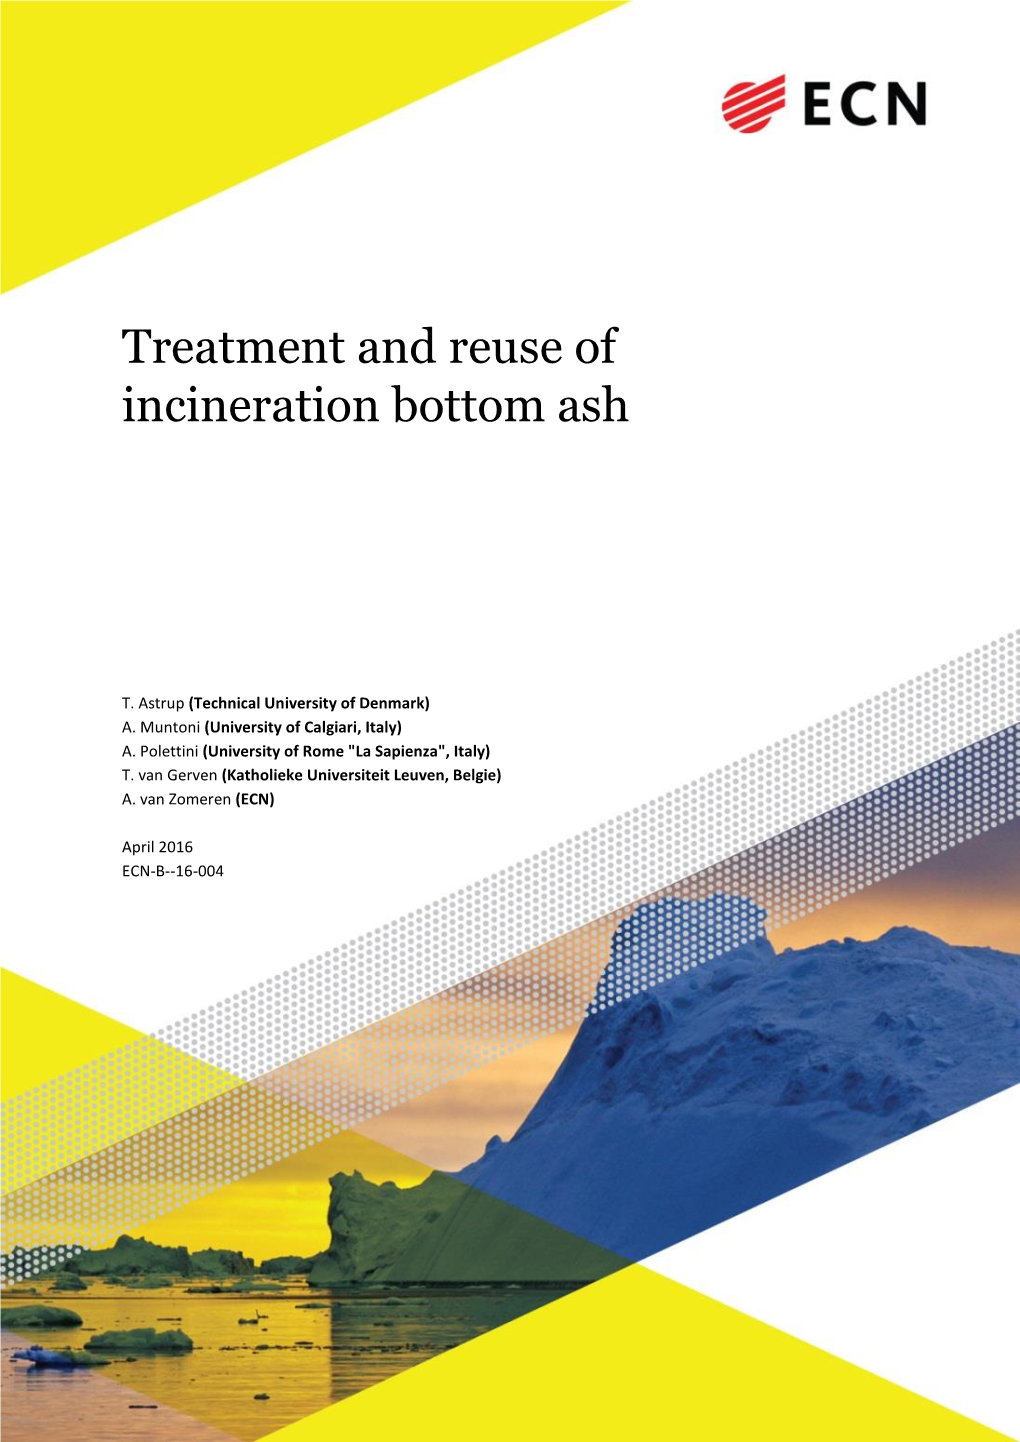 Treatment and Reuse of Incineration Bottom Ash